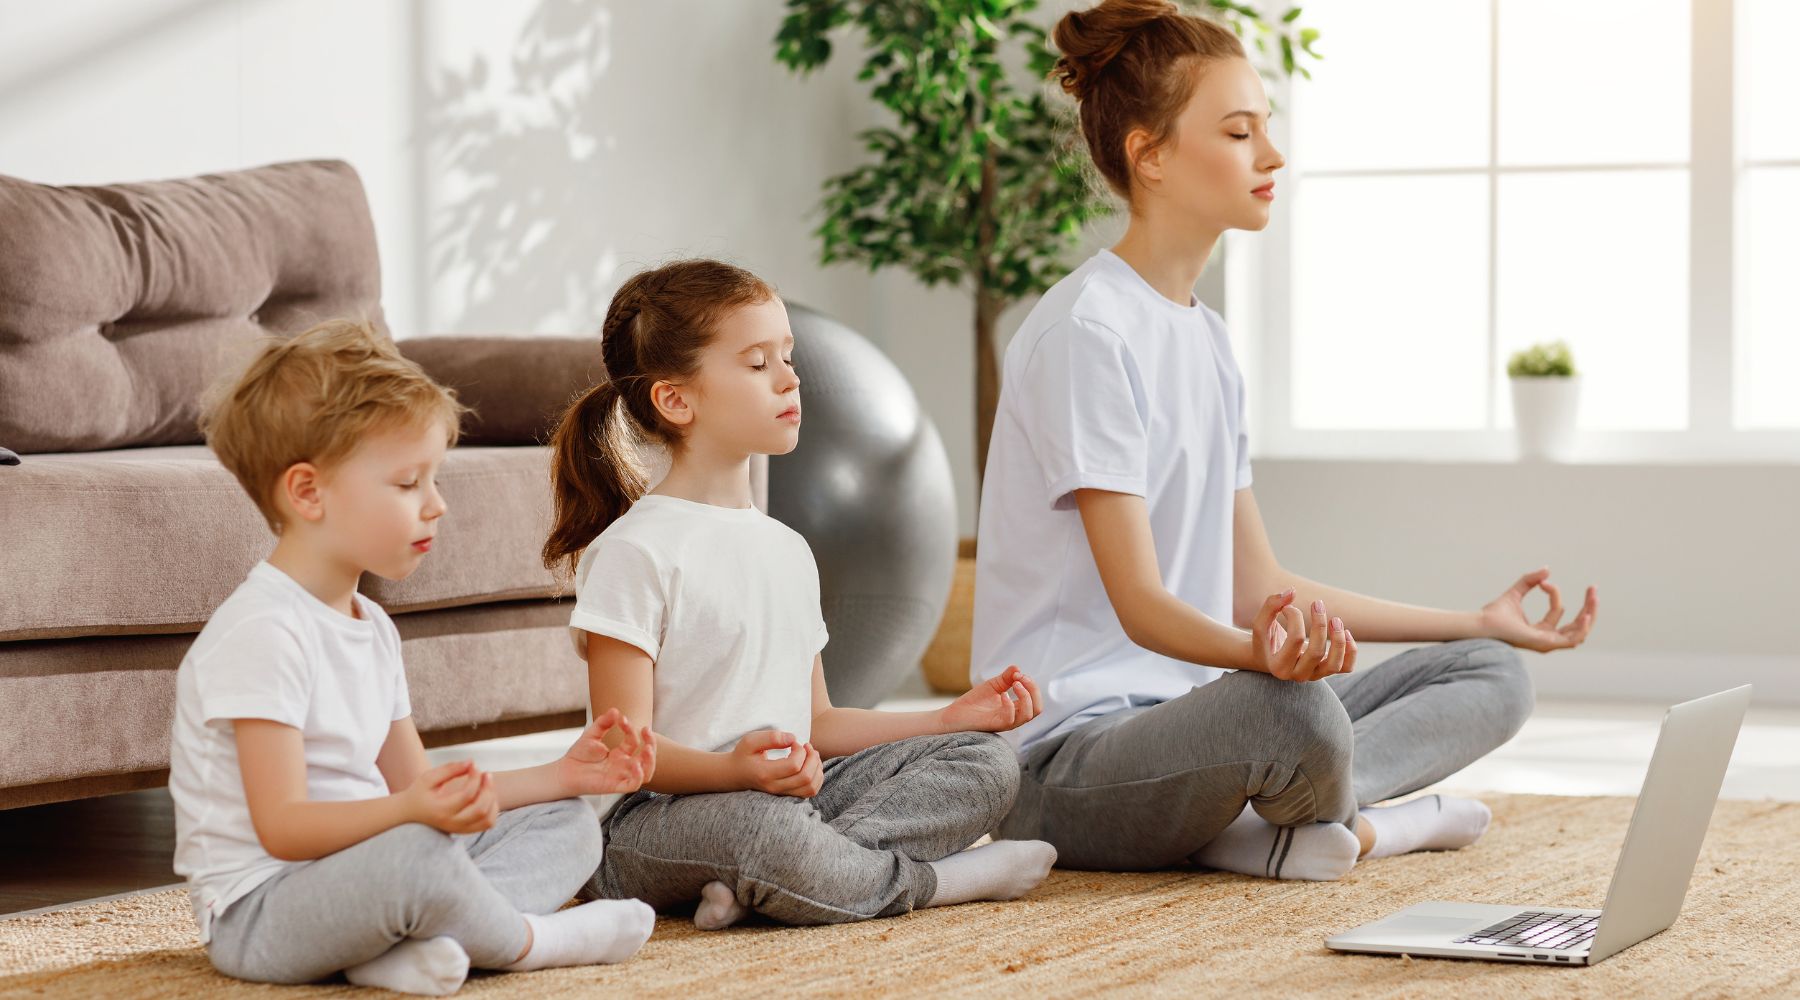 Why Meditation Should Be Taught In Schools - Feed Your Spirit